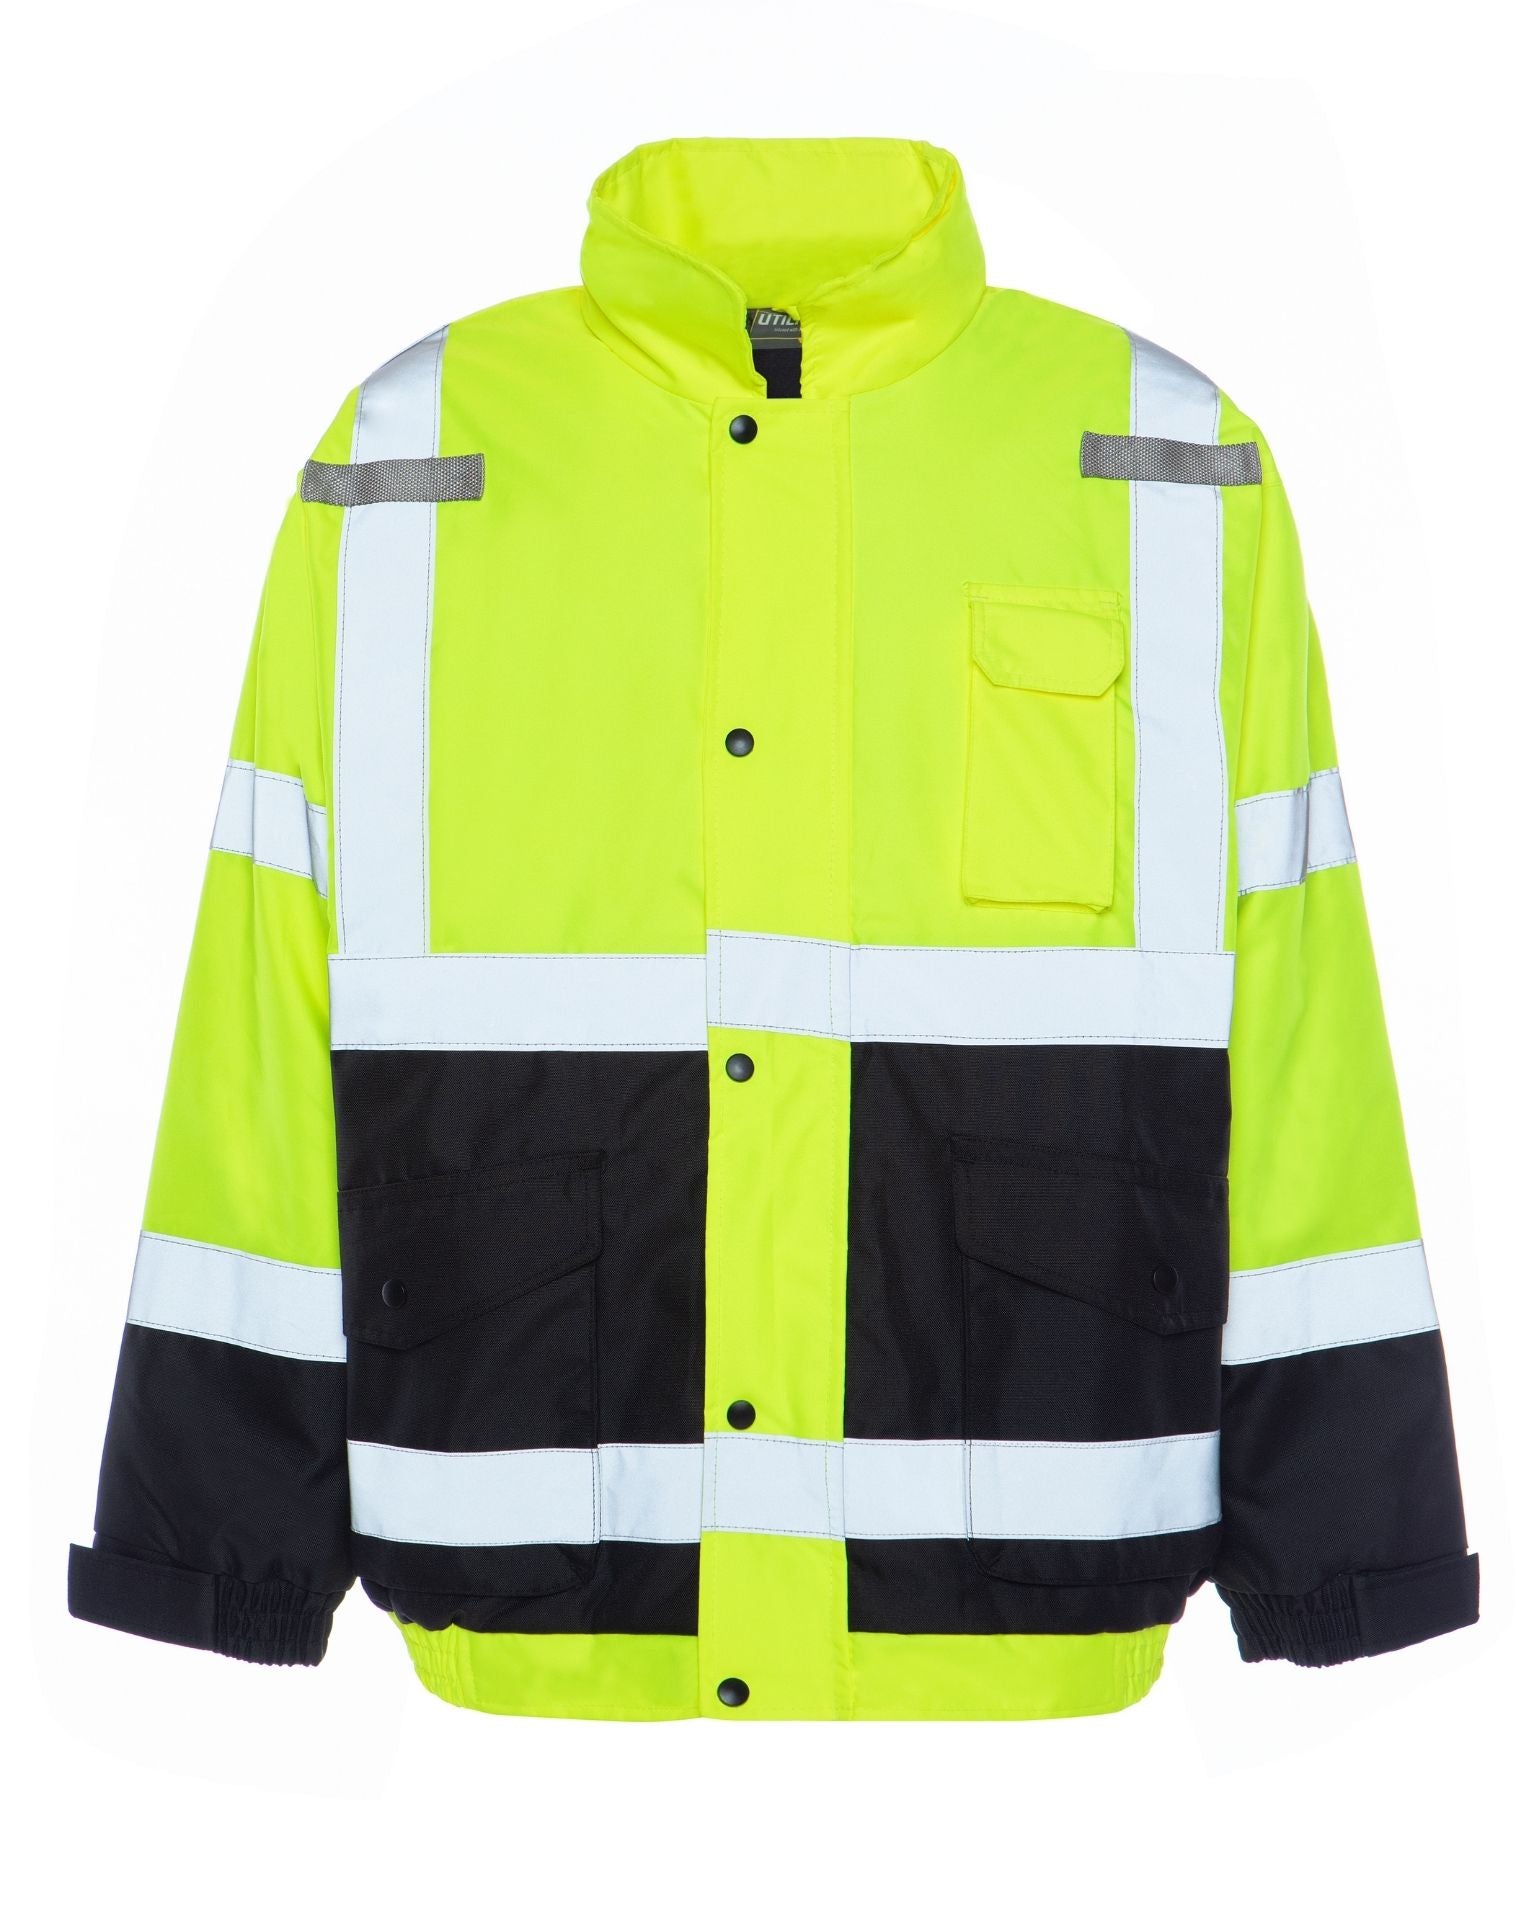 ANSI Class 3 High Visibility quilt lined bomber jacket by Utility Pro